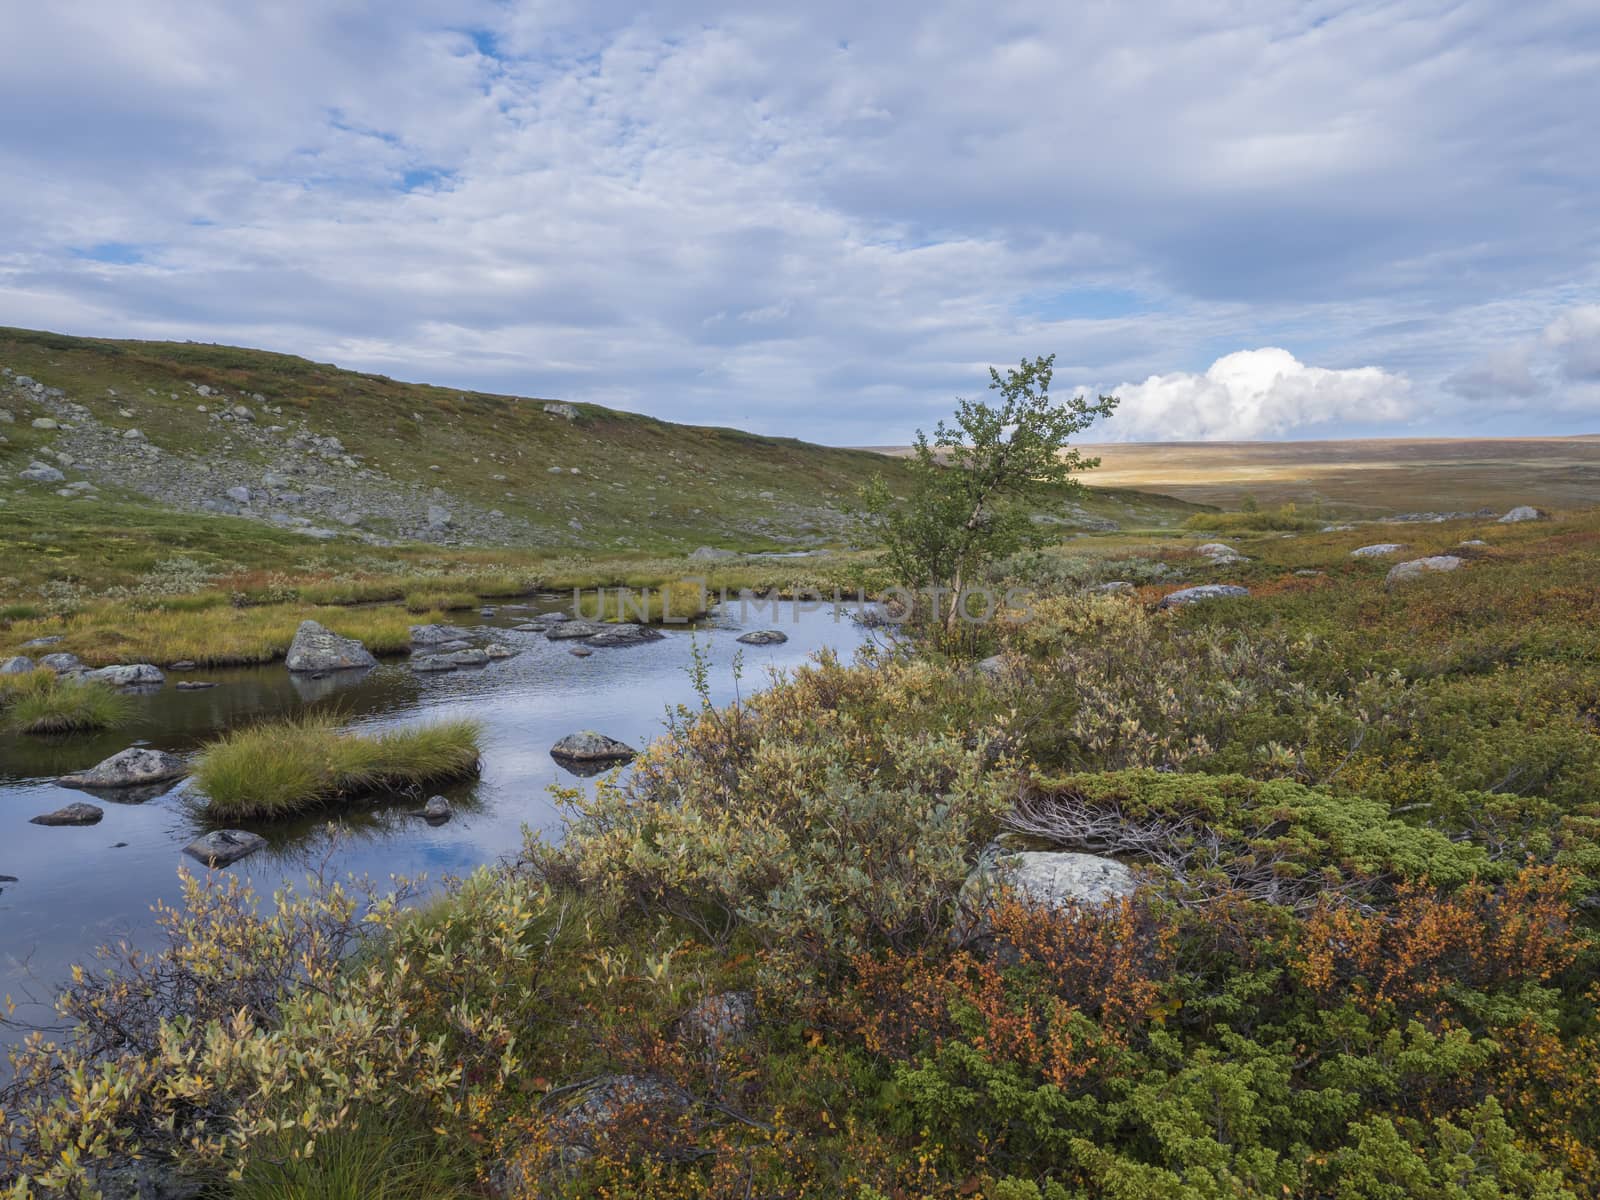 Lapland landscape with small pond, stones boulders, autumn colored bushes, birch tree,grass and mountains at Kungsleden hiking trail near Saltoluokta, Sweden. Blue sky white clouds